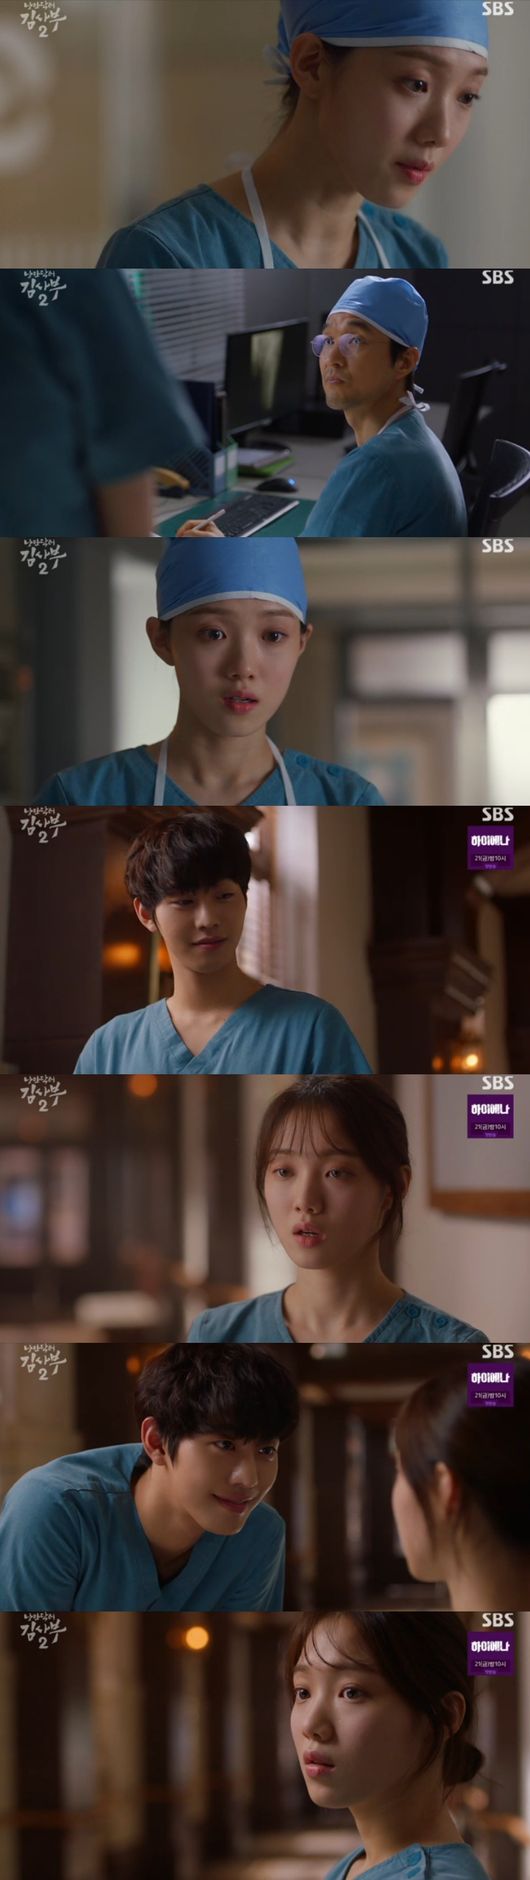 Lee Sung-kyung was shocked by the fact that Nausea medicine was a digestive agent in Romantic Doctor Kim Sabu 2.On the 17th, SBS monthly drama Romantic Doctor Kim Sabu Season 2 (director Yoo In-sik, Lee Gil-bok, and Kang Eun-kyung of the play), Yang Ho-joon (Go Sang-ho) worked behind the scenes with Do Hyun-woo on the manual replacement of Doldam Hospital.In addition, Yang tried to blacklist Kim Sa-bu.In the meantime, Ju Ji-bae (Seo Young-min) said that he should go to the master and take measures before the board decision.When asked why the master hesitated, Kim said, There is no reason for it, it is just because of people. Doctors and medical staff should be properly equipped, leaders are needed.Woojin (Ahn Hyo-seop) followed the debtors secretly to avoid harming the debtors, who also came to him again and did not harm the silver (Lee Sung-kyung).Eunjae, who had been dealing with personal affairs, suddenly called Woojin, but Woojin was already taken to the debtors.11 hours ago, Woojin, who became Masters doctor, worried about when the Master would undergo formal surgery.The master was rather worried about Woojin, who did not enter the operating room, and Woojin soothed his concern that he was a grass problem with Park Min-guk (Kim Joo-heon).The emergency room at Doldam Hospital was busy with emergency patients, and a factory worker who had his legs cut off was screaming and suffering, and the master helped Moon Jeong (Shin Dong-wook) to start surgery.However, the patient refused to operate because of the cost of the operation. The master, who had been informed of the unfortunate situation, tried to contact the factory officials, but no one came.Park Min-guk blocked Woojins surgery, which complicated the situation at Doldam Hospital. Woojin informed the situation that emergency trauma patients were being pushed to stimulate Park Min-guk.Woojin said, I will take it until I get it. He waited for his surgery to be released.At this time, Park Min-guk called Woojin again.Park Min-guk said, Just take emergency trauma until the VIP surgery is over, do not bother my team anymore.Thanks to Woojin, he was back on the operating table.Eun-jae asked the master about the prescription of the drug, saying that his Nausea medicine was out, and he said that it was a digestive agent, and that it would be pressure Nausea when he consulted the neuropsychiatry.I do not need to feel the pressure that came from your body, the master said. I have done well and I will do well in the future.Romantic Floor 2 broadcast screen capture